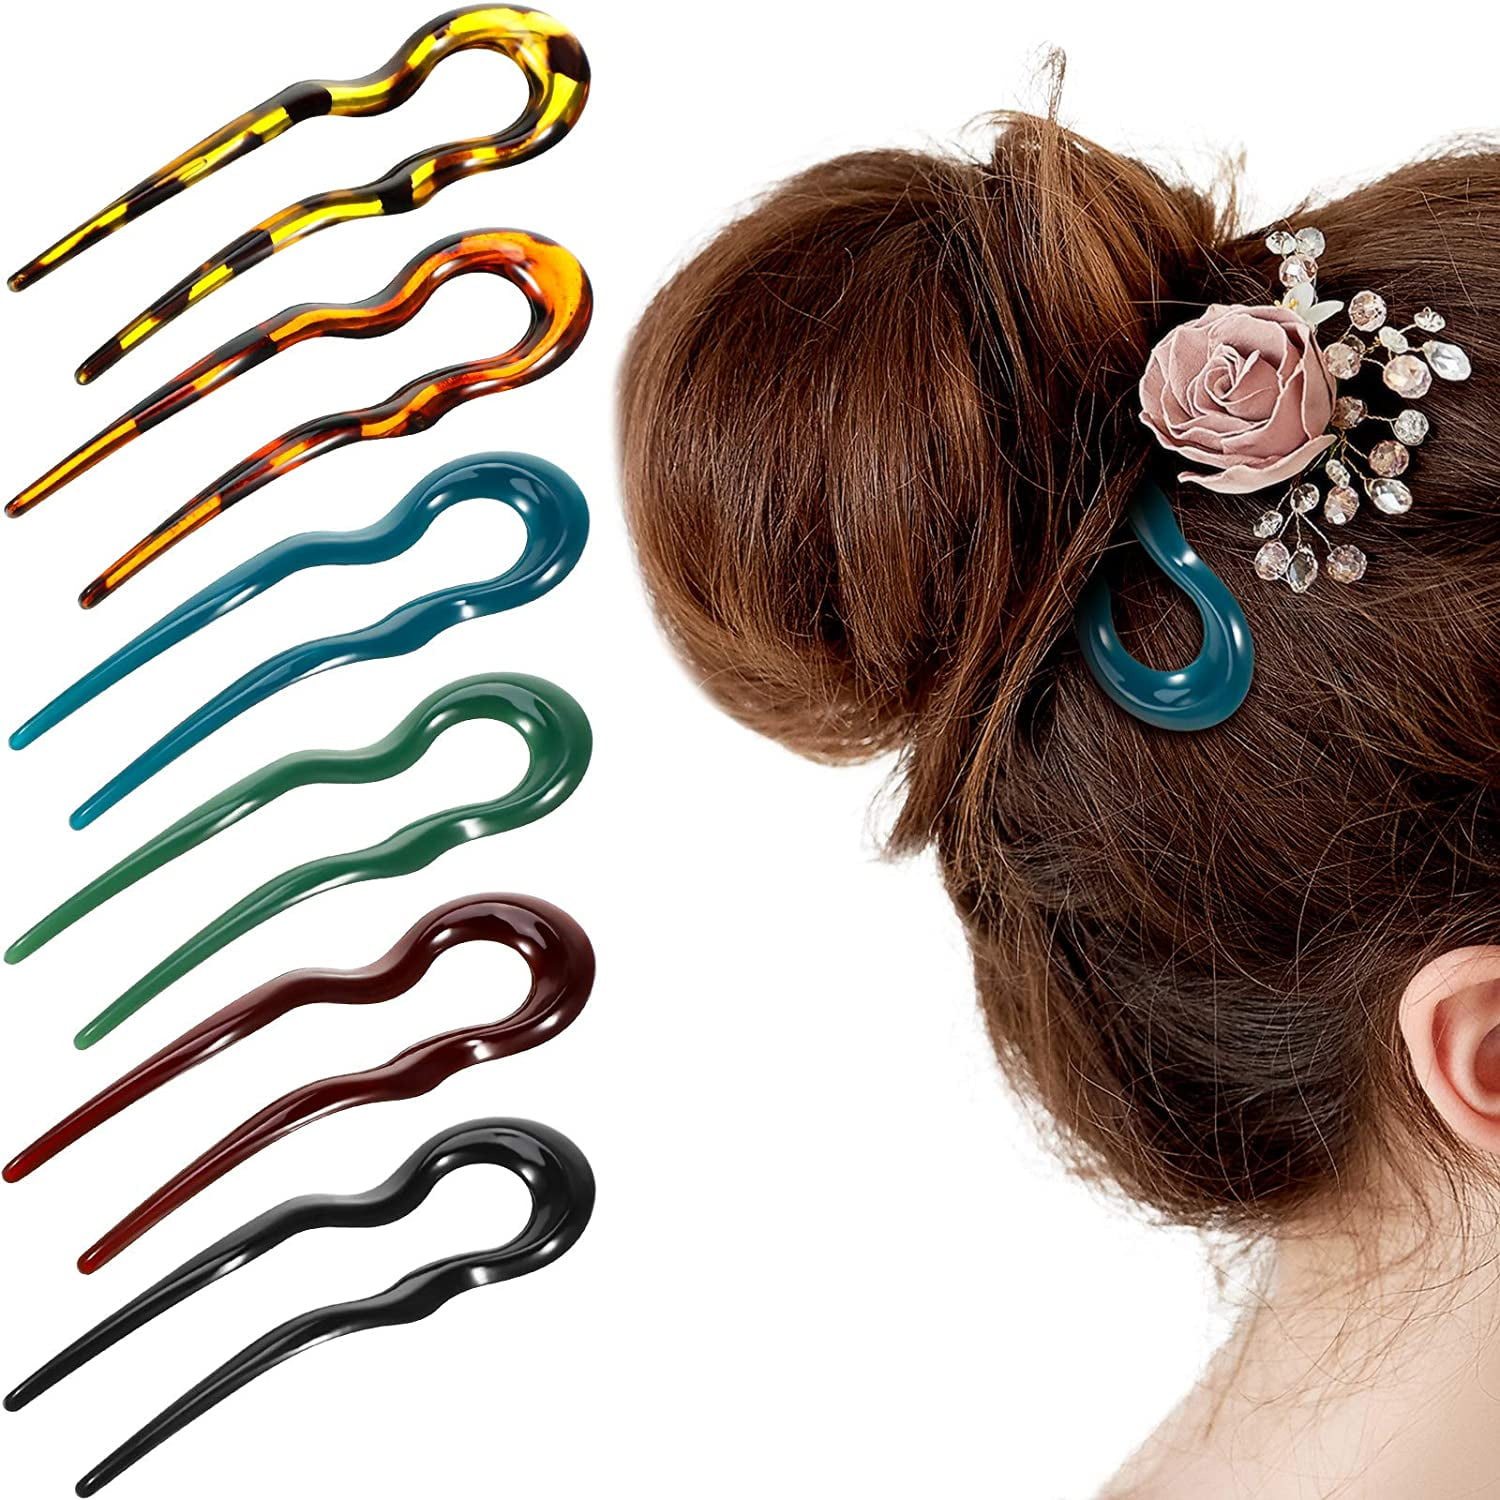 6 Pieces U Shaped Hair Pins French Style Hair Stick Fork for Thick Long Hair,  Cellulose Acetate Wavy Updo Chignon Pin Hair Accessories for Women Girl  (Black, Blue, Green, Wine Red, Leopard